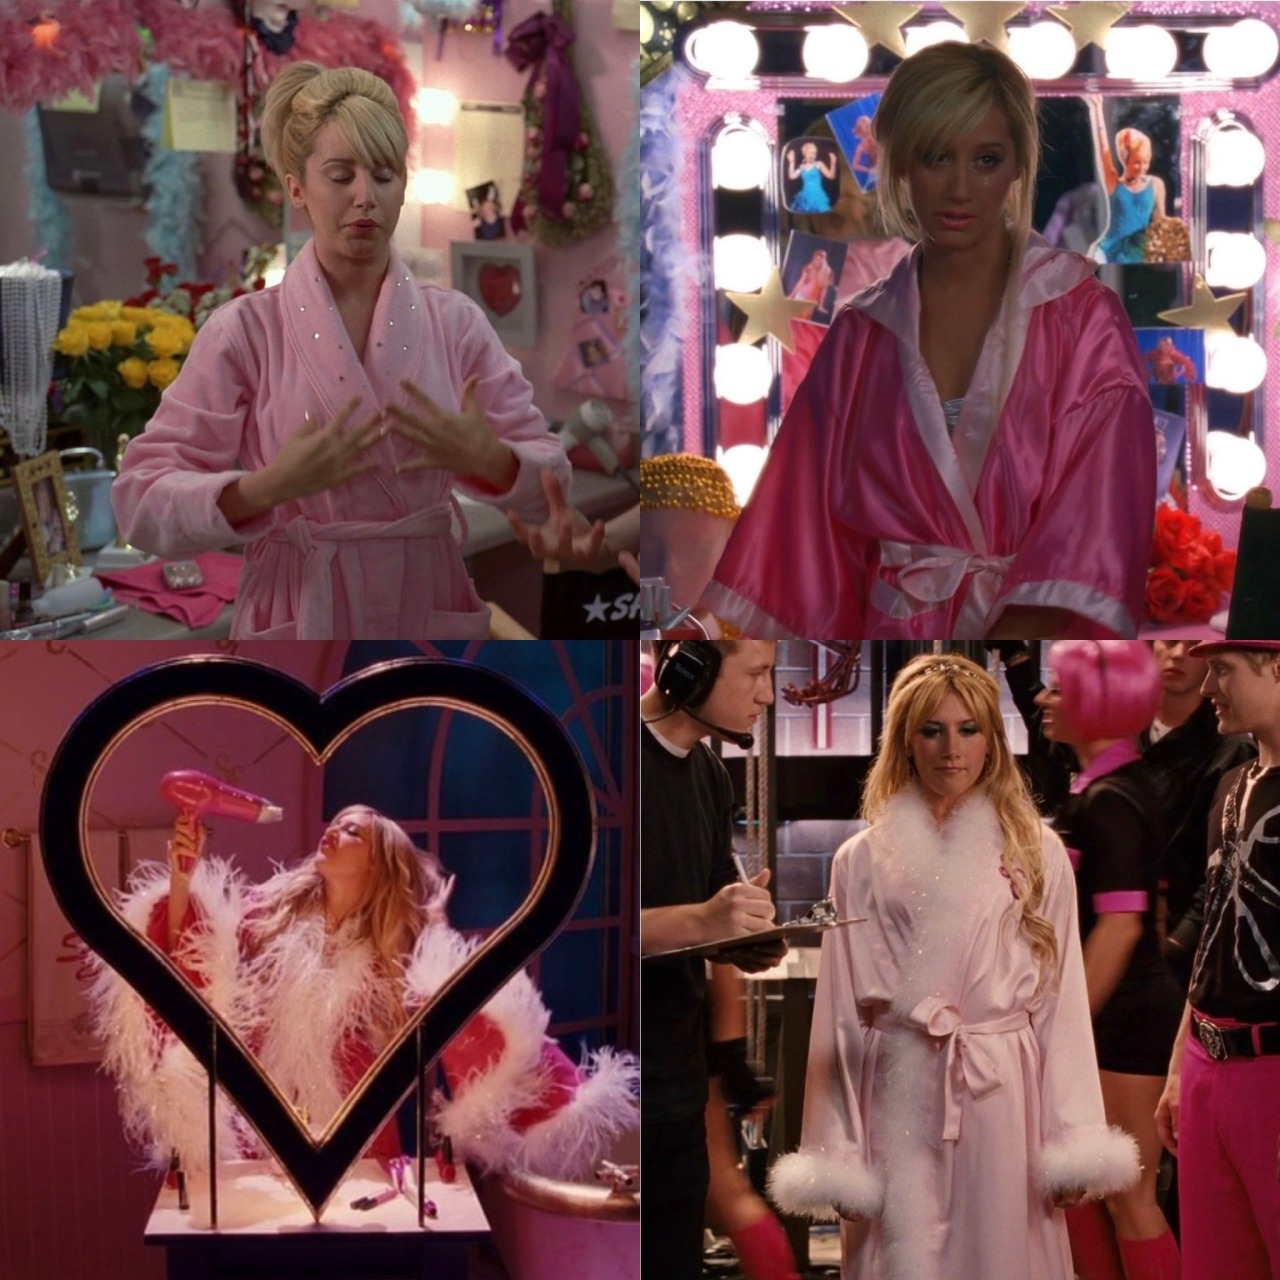 Sharpay Evans and her pink and fabulous robes #sharpay evans#pink#pink aesthetic#y2k#2000s#hsm #high school musical  #high school musical 2  #high school musical 3: senior year #heart#ashley tisdale#disney#disney channel